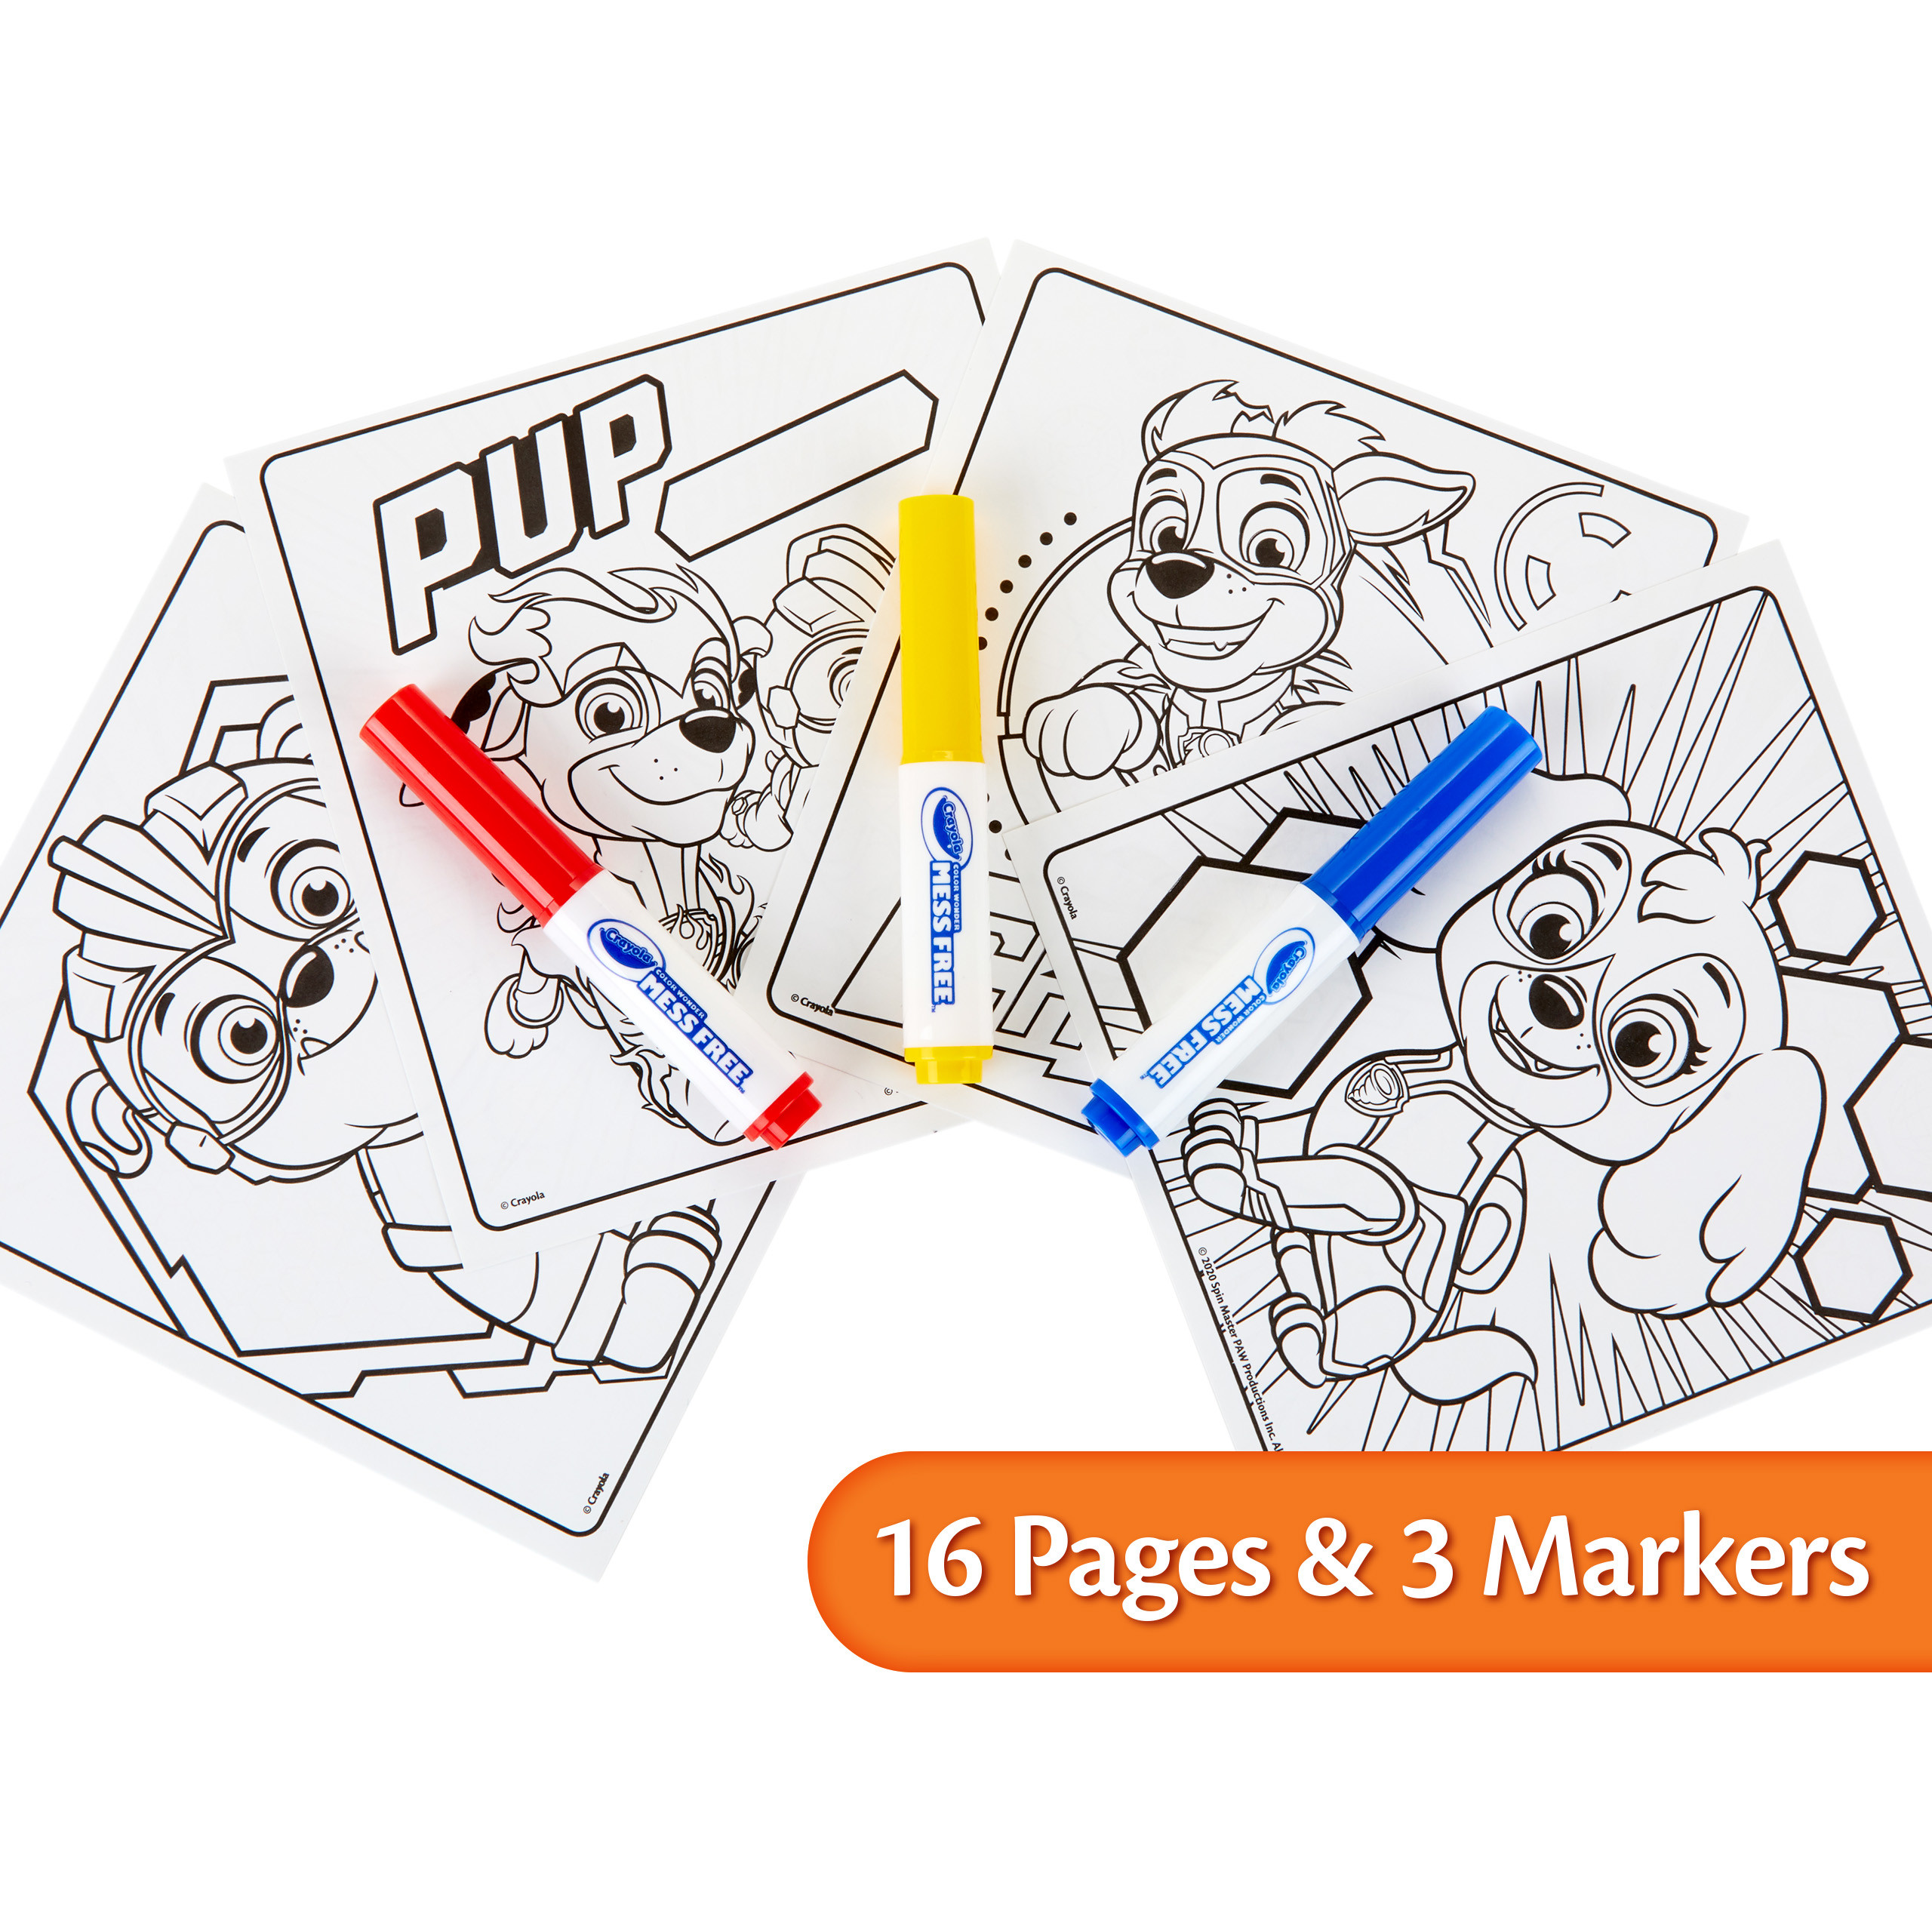 Crayola Color Wonder Paw Patrol Coloring Book & Activity Pad, 16 Pages, Unisex Child - image 3 of 7